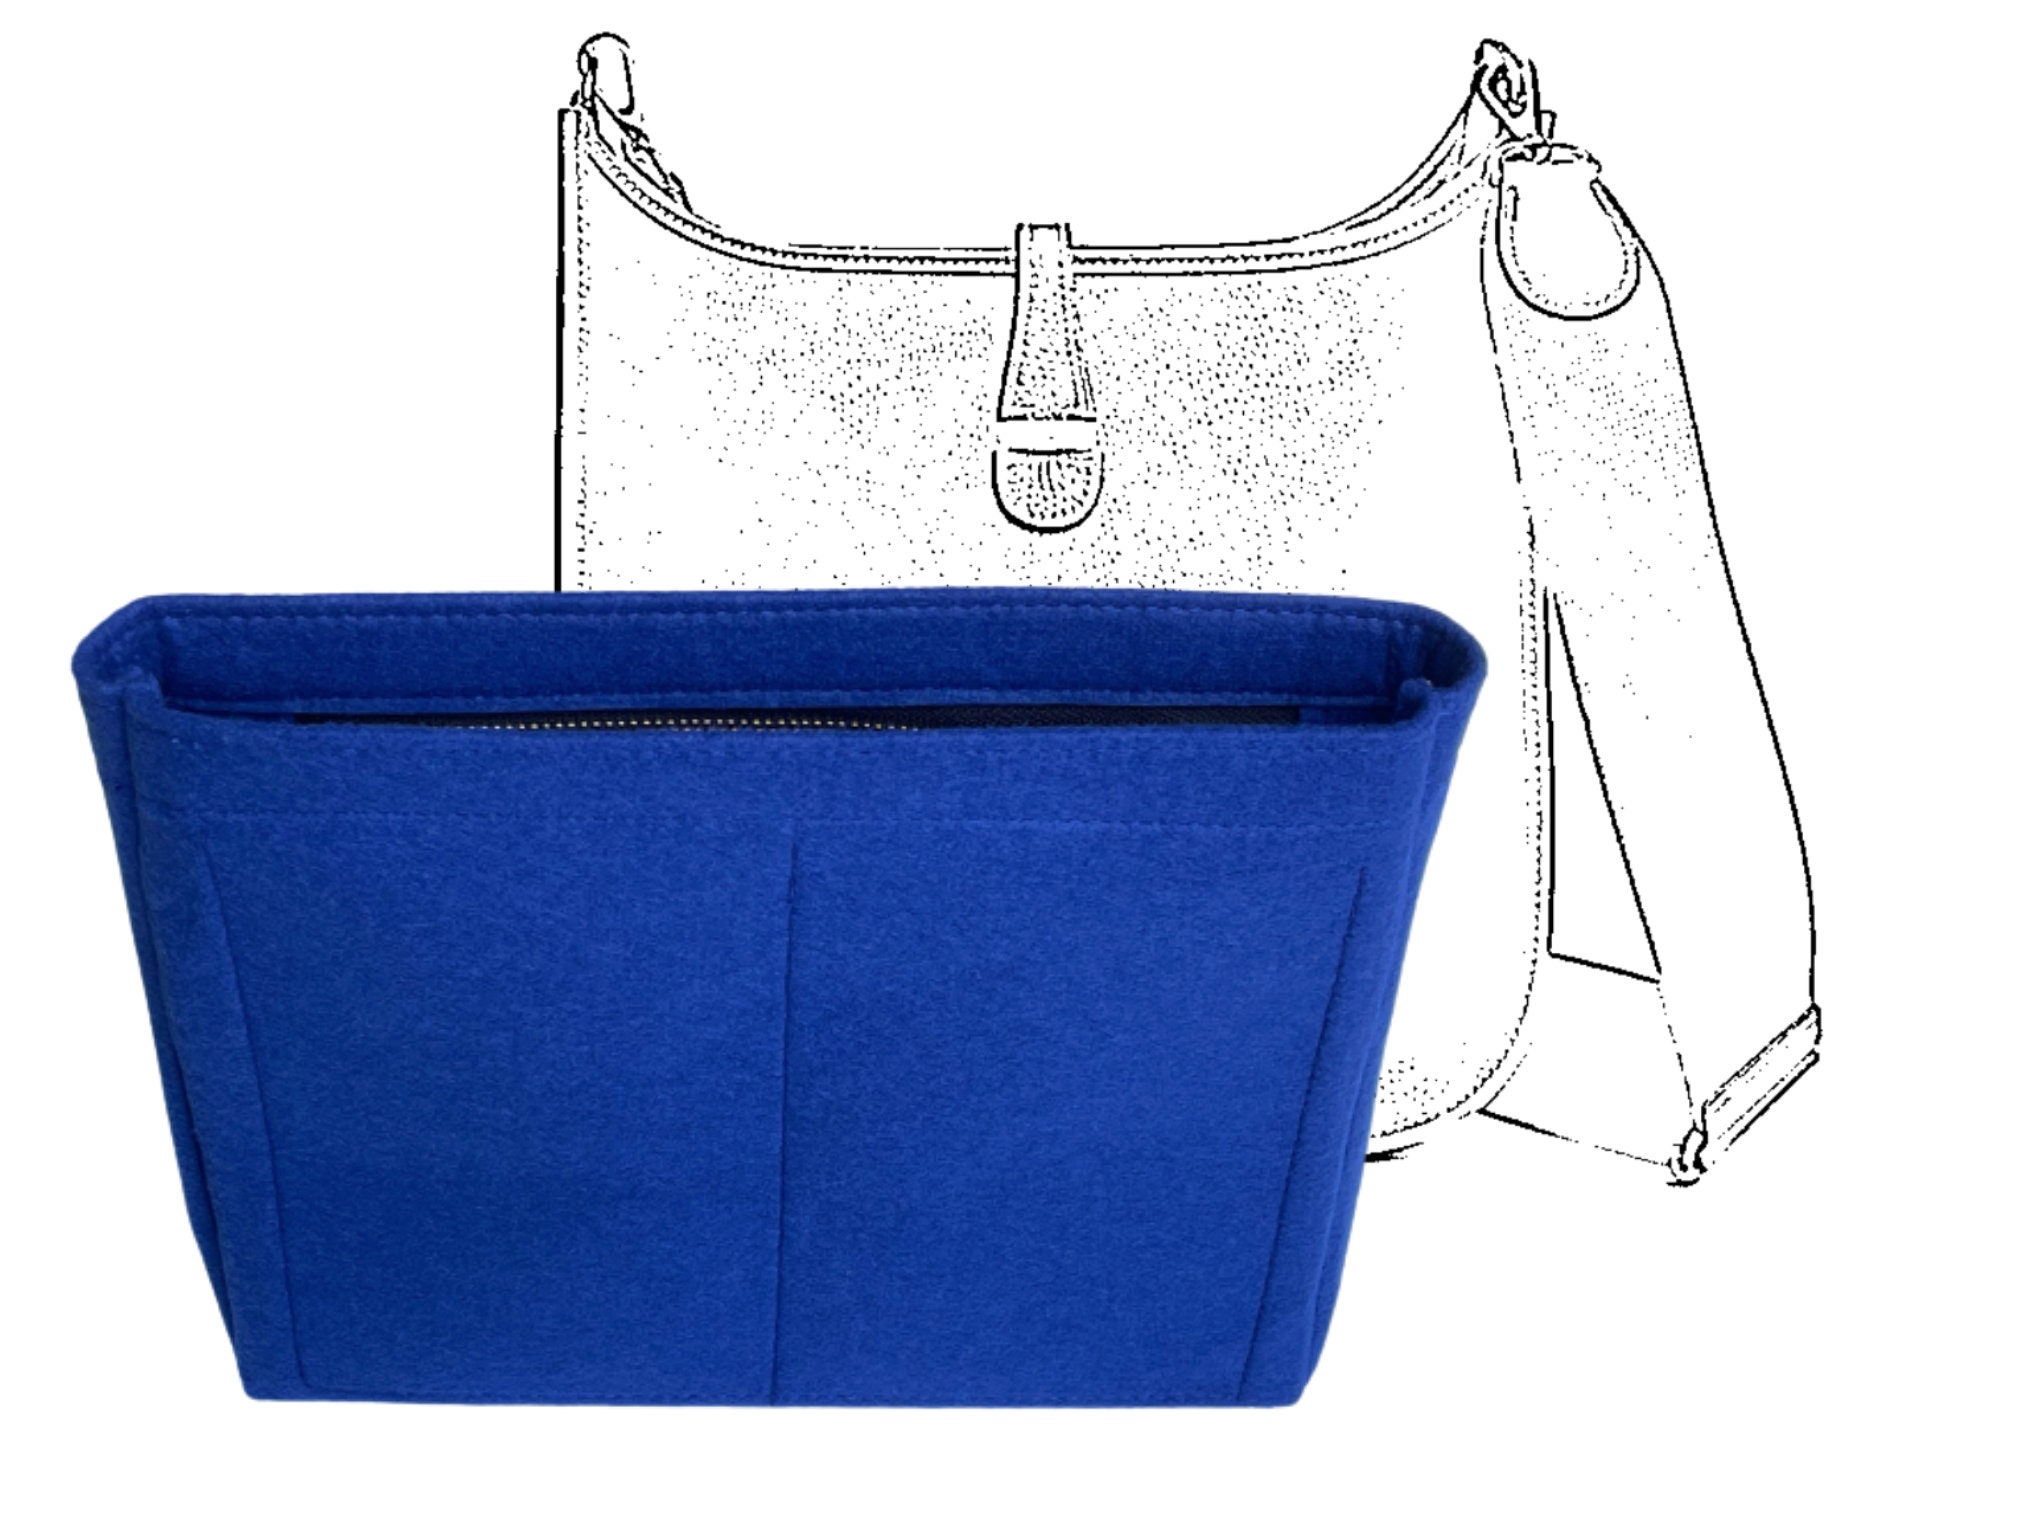 For [KIRIGAMI POCHETTE Spring Collection] (3-in-1 pouch) Felt Insert  Organizer with Shoulder Strap Chain Covert to Crossbody Bag - JennyKrafts